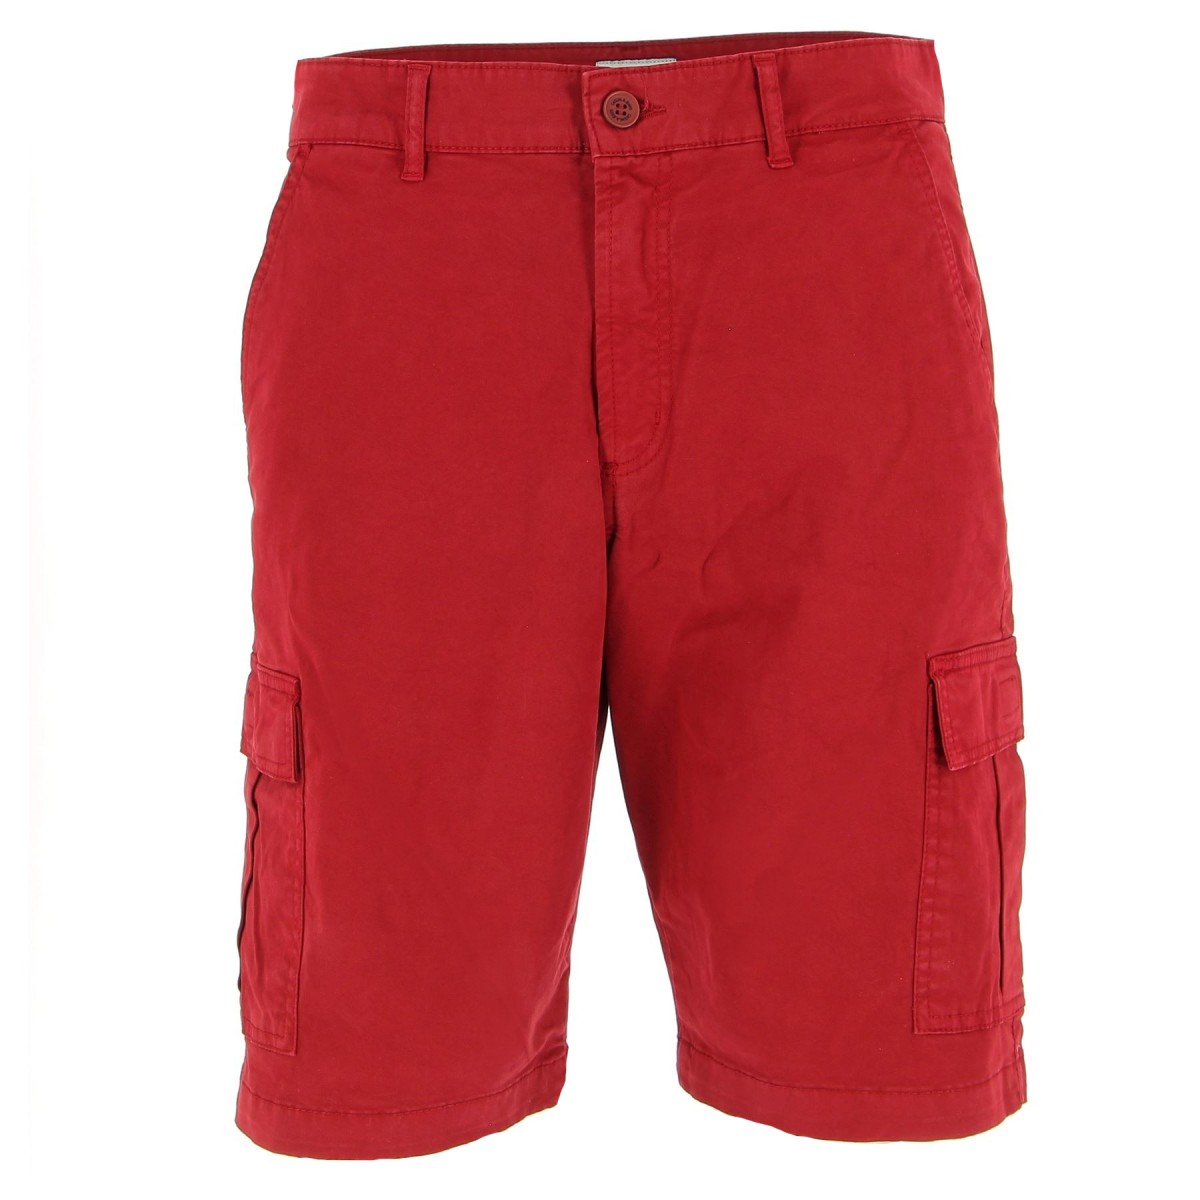 BERMUDA CARGO HOMME YACHTING ROUGE -MATIERE NOBLE 39.90€